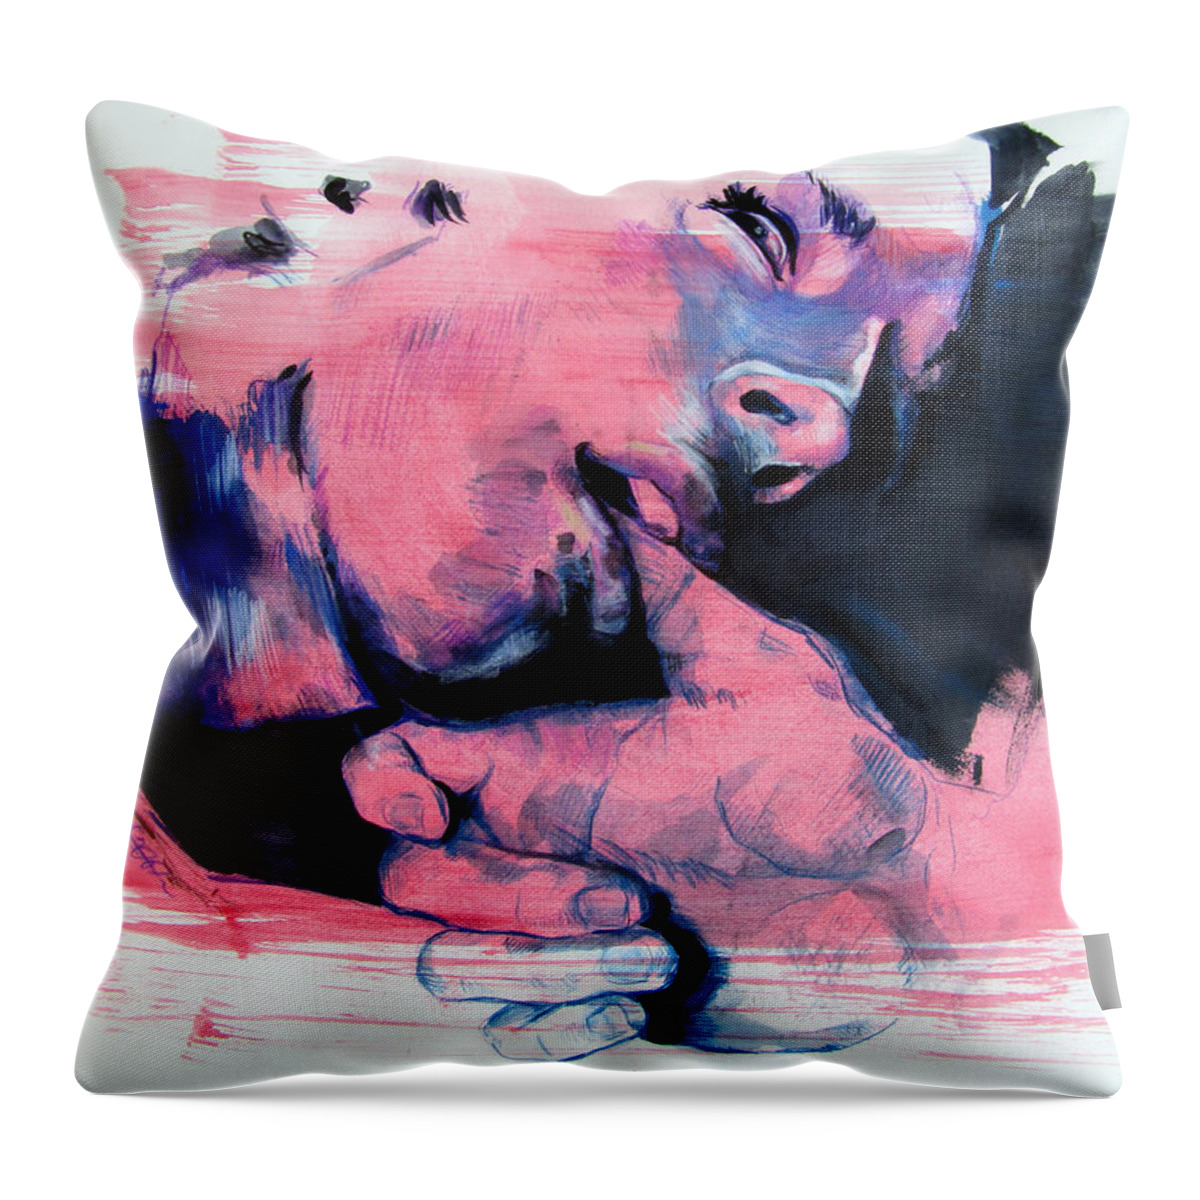 Love Throw Pillow featuring the painting Tough Love by Rene Capone